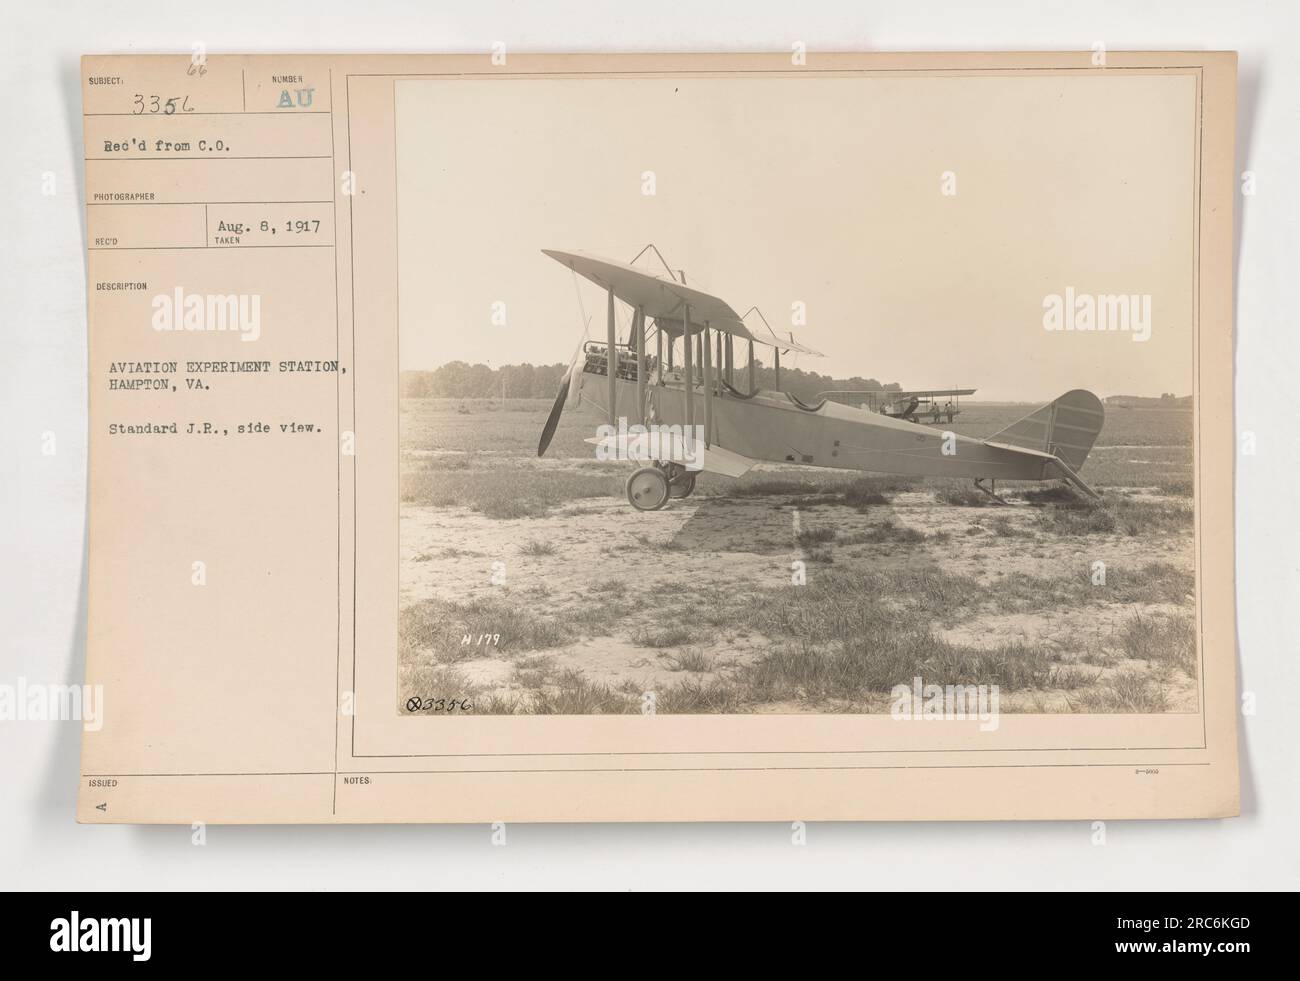 J.R. side view of the Standard J.R. aircraft at Hampton's Aviation Experiment Station. Photograph taken on August 1, 1917, with identifier 111-SC-3356. This image was received from the commanding officer and matches the photographer's description. It was subsequently issued with the identification number AU Aug. 8, 1917. Additional notes include H/79 03356. Stock Photo